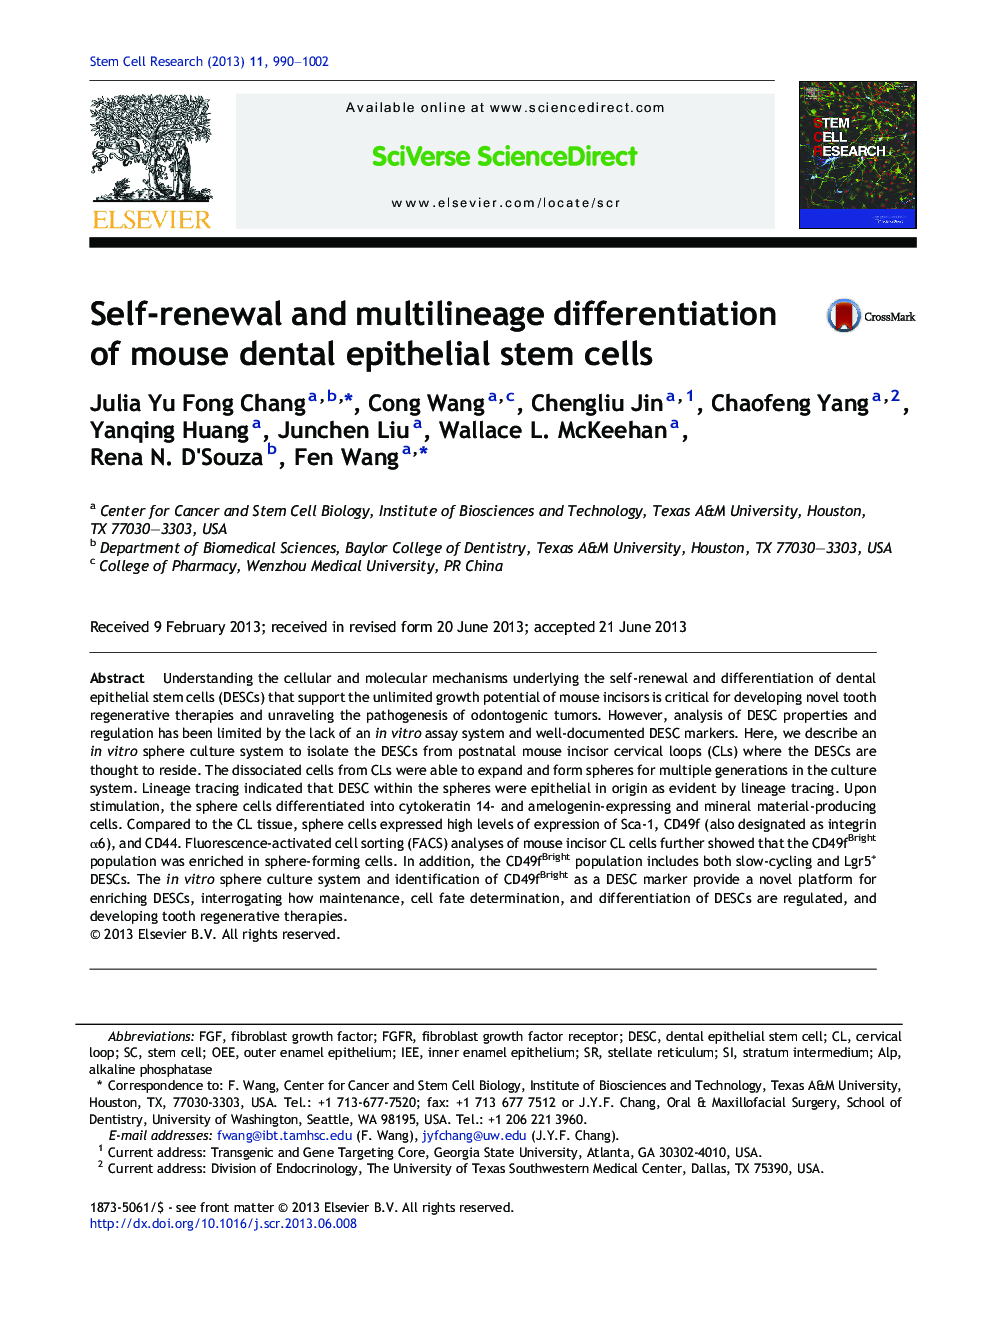 Self-renewal and multilineage differentiation of mouse dental epithelial stem cells